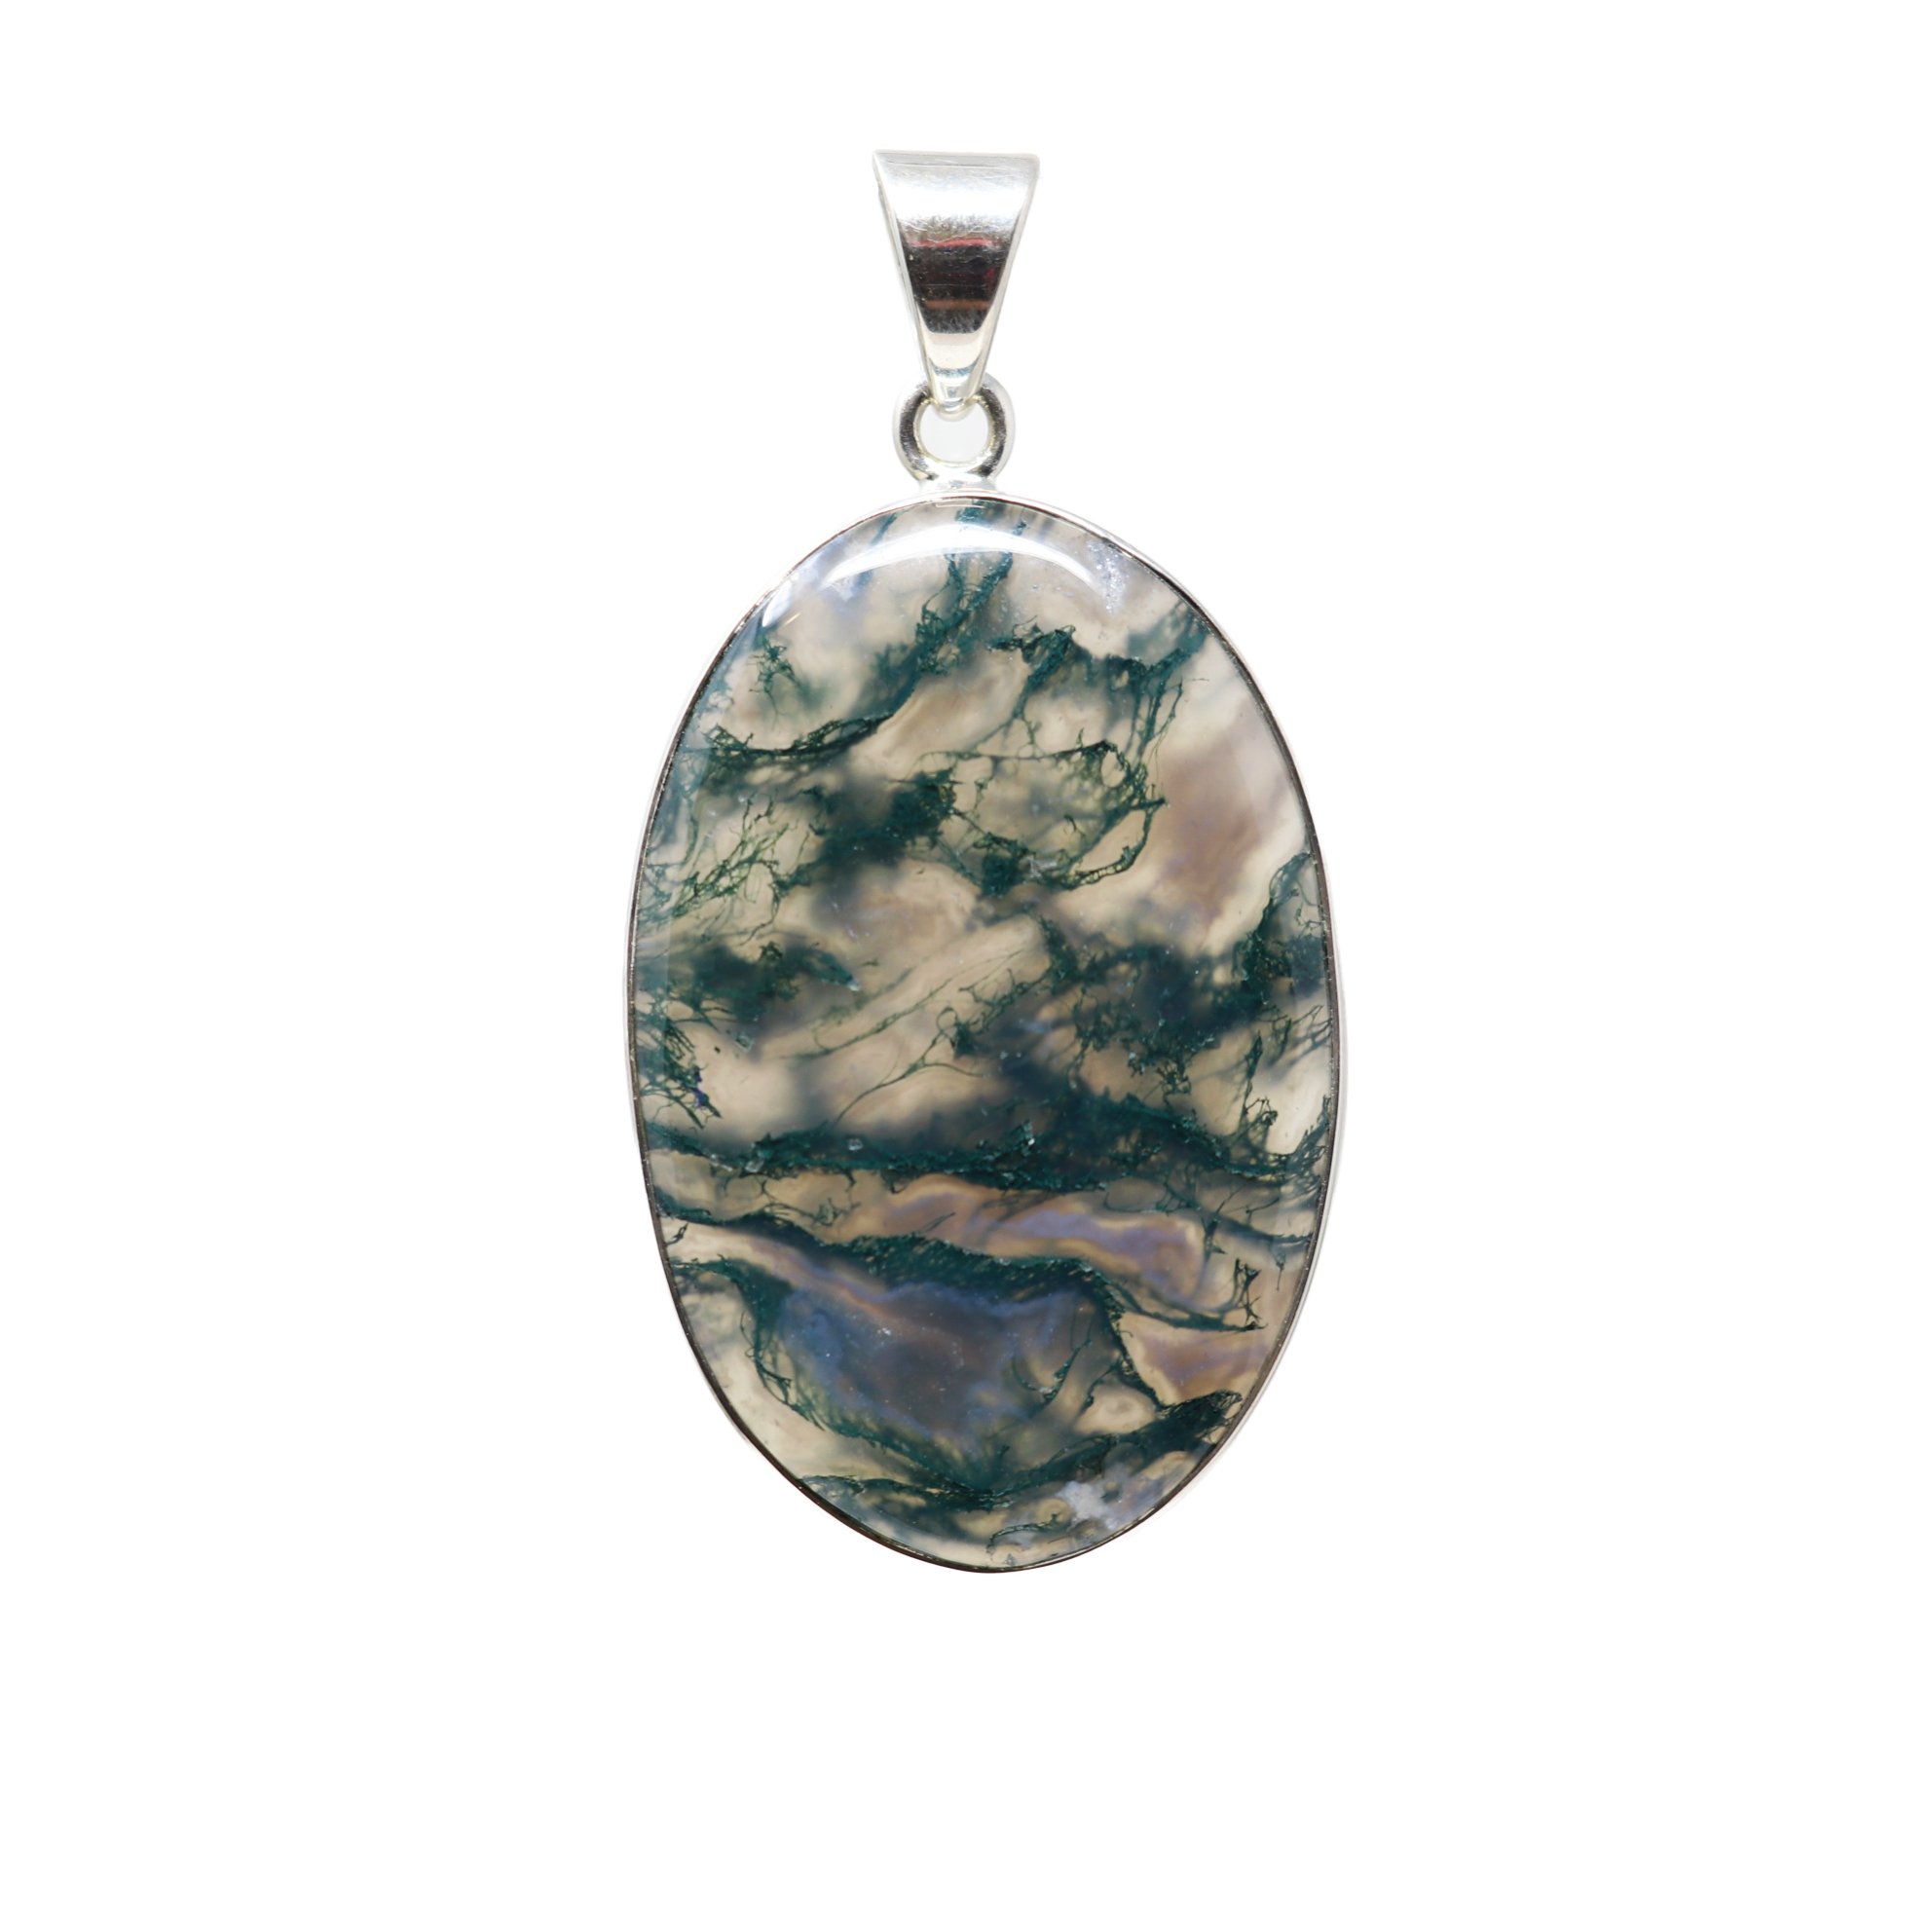 Moss Agate Pendant - Classic Oval Cabochon With Simple 925 Sterling Silver Bezel